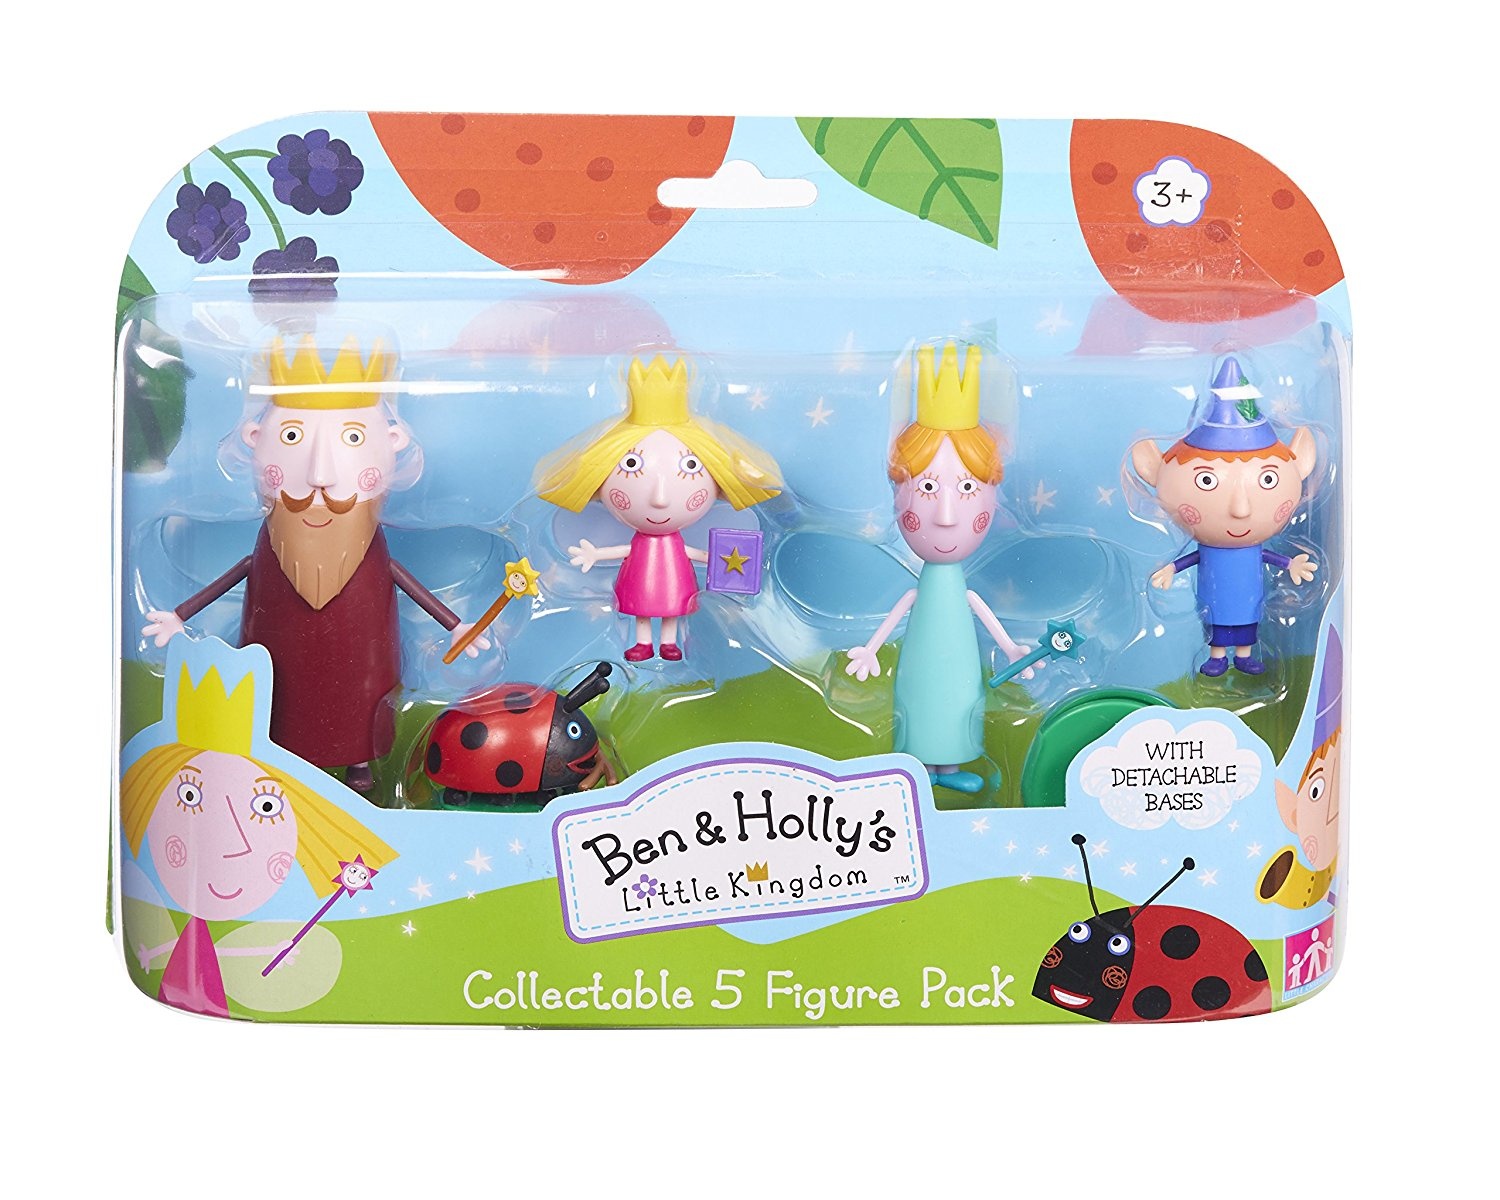 Holly s little kingdom. Ben and Holly's little Kingdom. Hollys little Kingdom игрушка. Бен и Холли фото. Набор Бен и Холли.